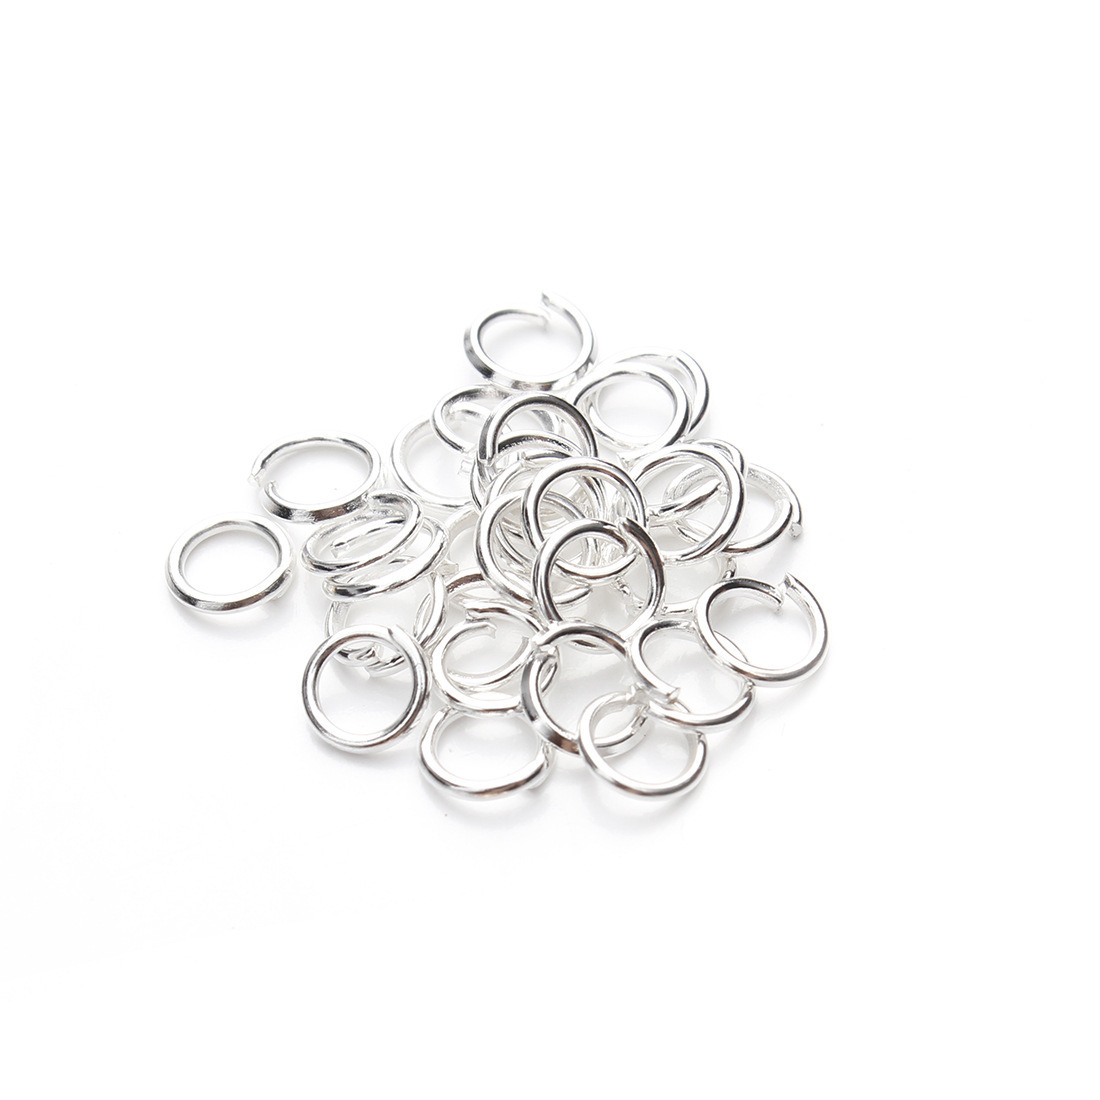 Silver outer diameter 14mm